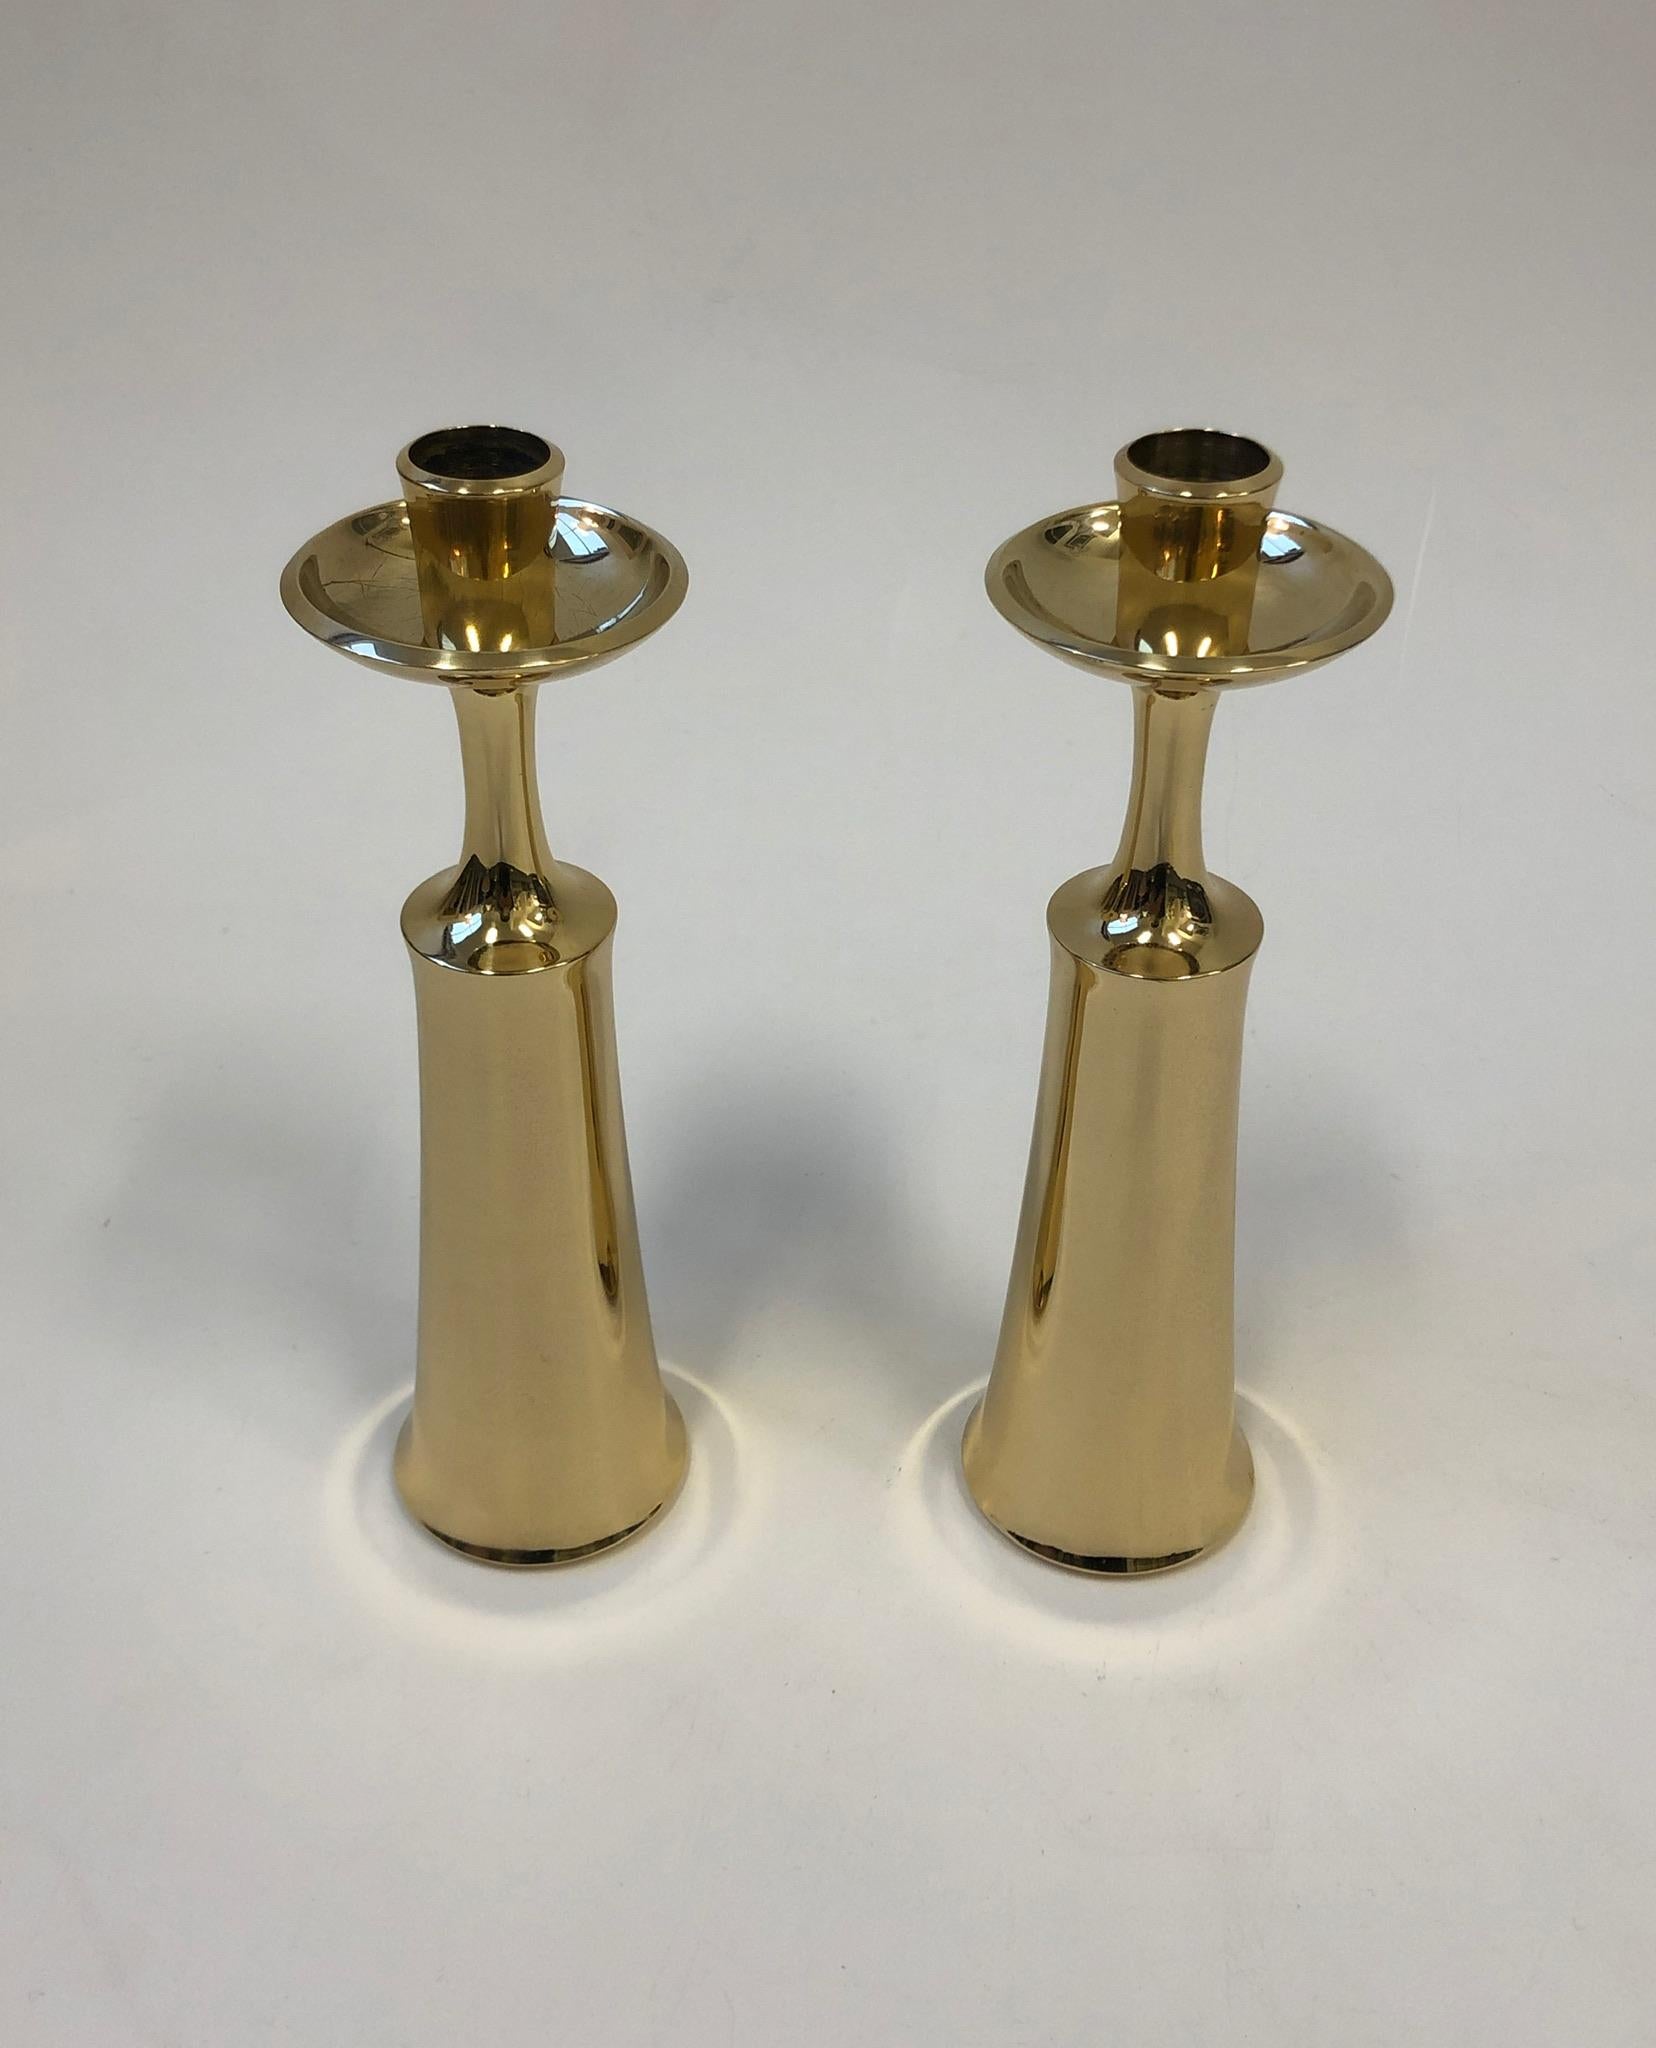 A beautiful pair of solid polish brass candlesticks design by Jens Quistgaard for Dansk in the 1950s. Newly professionally polish and lacquered. The candlesticks are signed (see detail photos). Each candleholder measures: 9.5” high and 2.75”